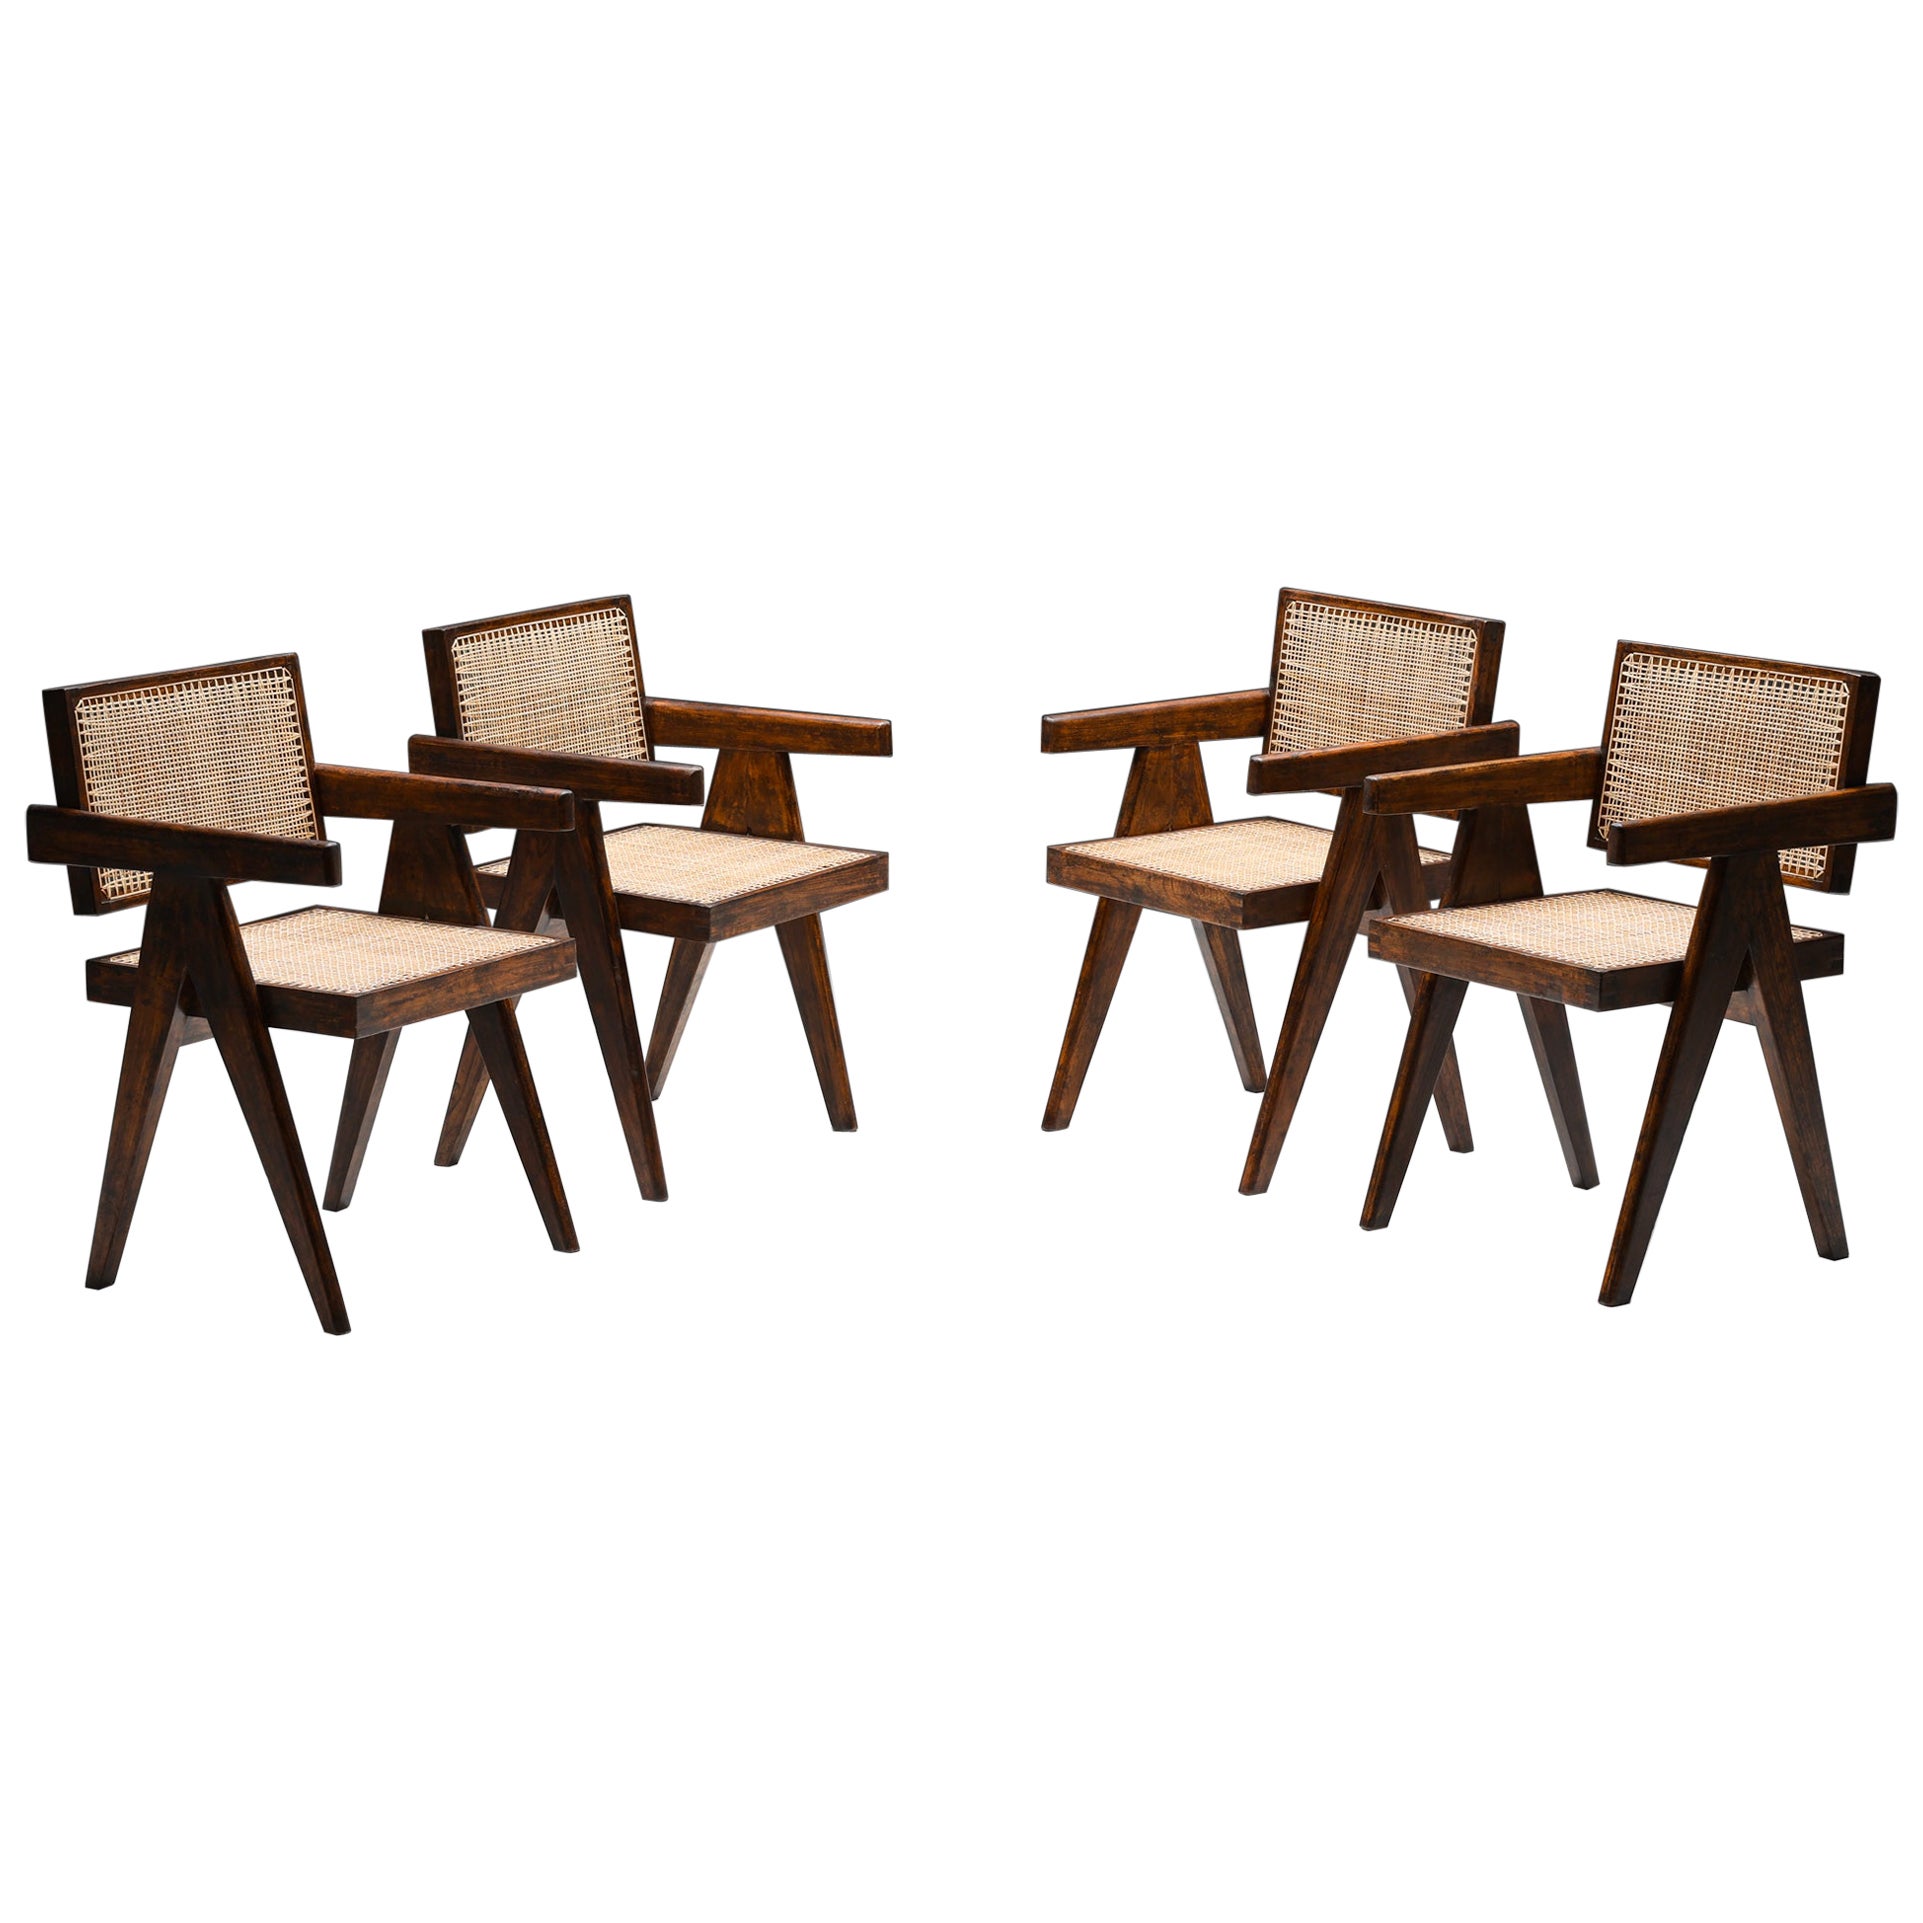 Office Cane Chairs by Pierre Jeanneret, PJ-SI-28-A, Rosewood, Chandigarh, 1955